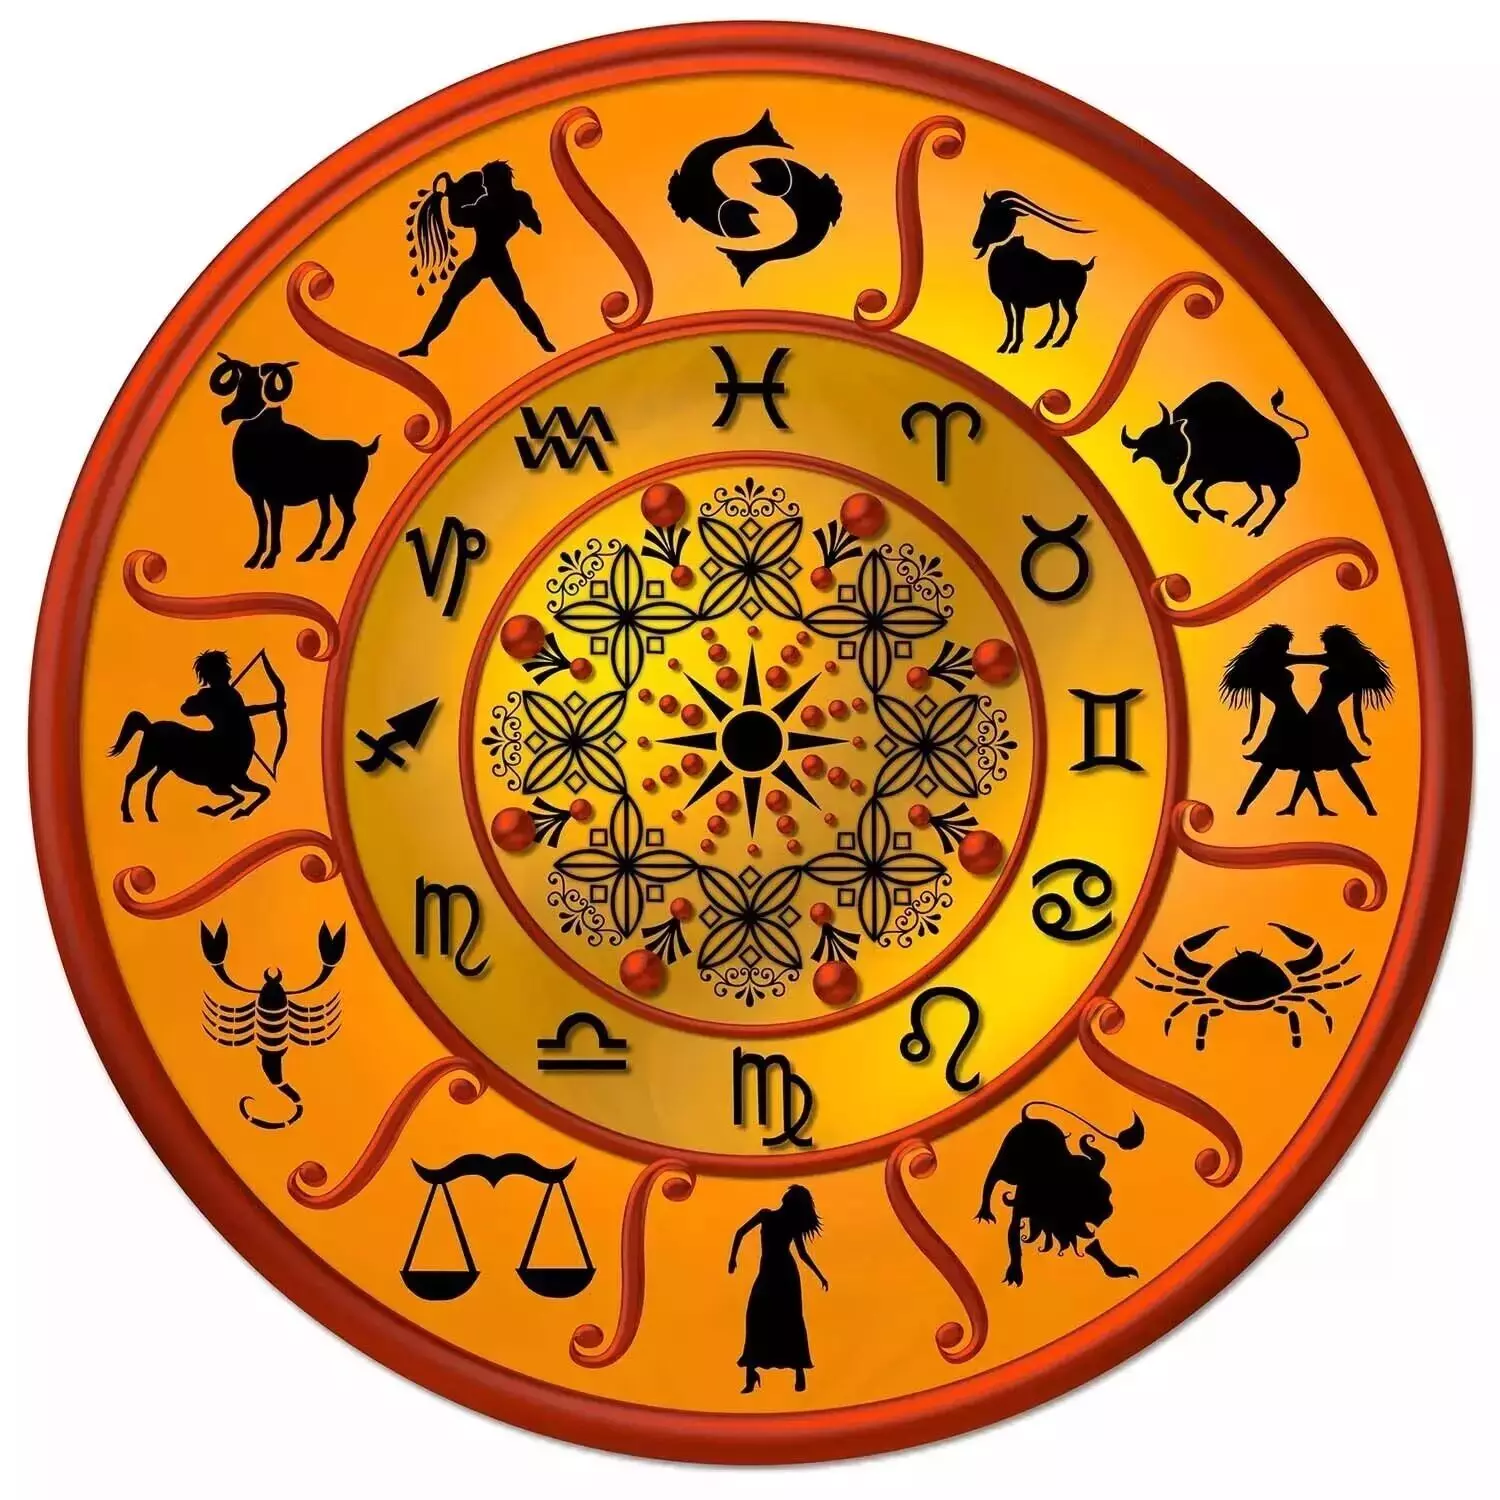 03 February – Know your todays horoscope